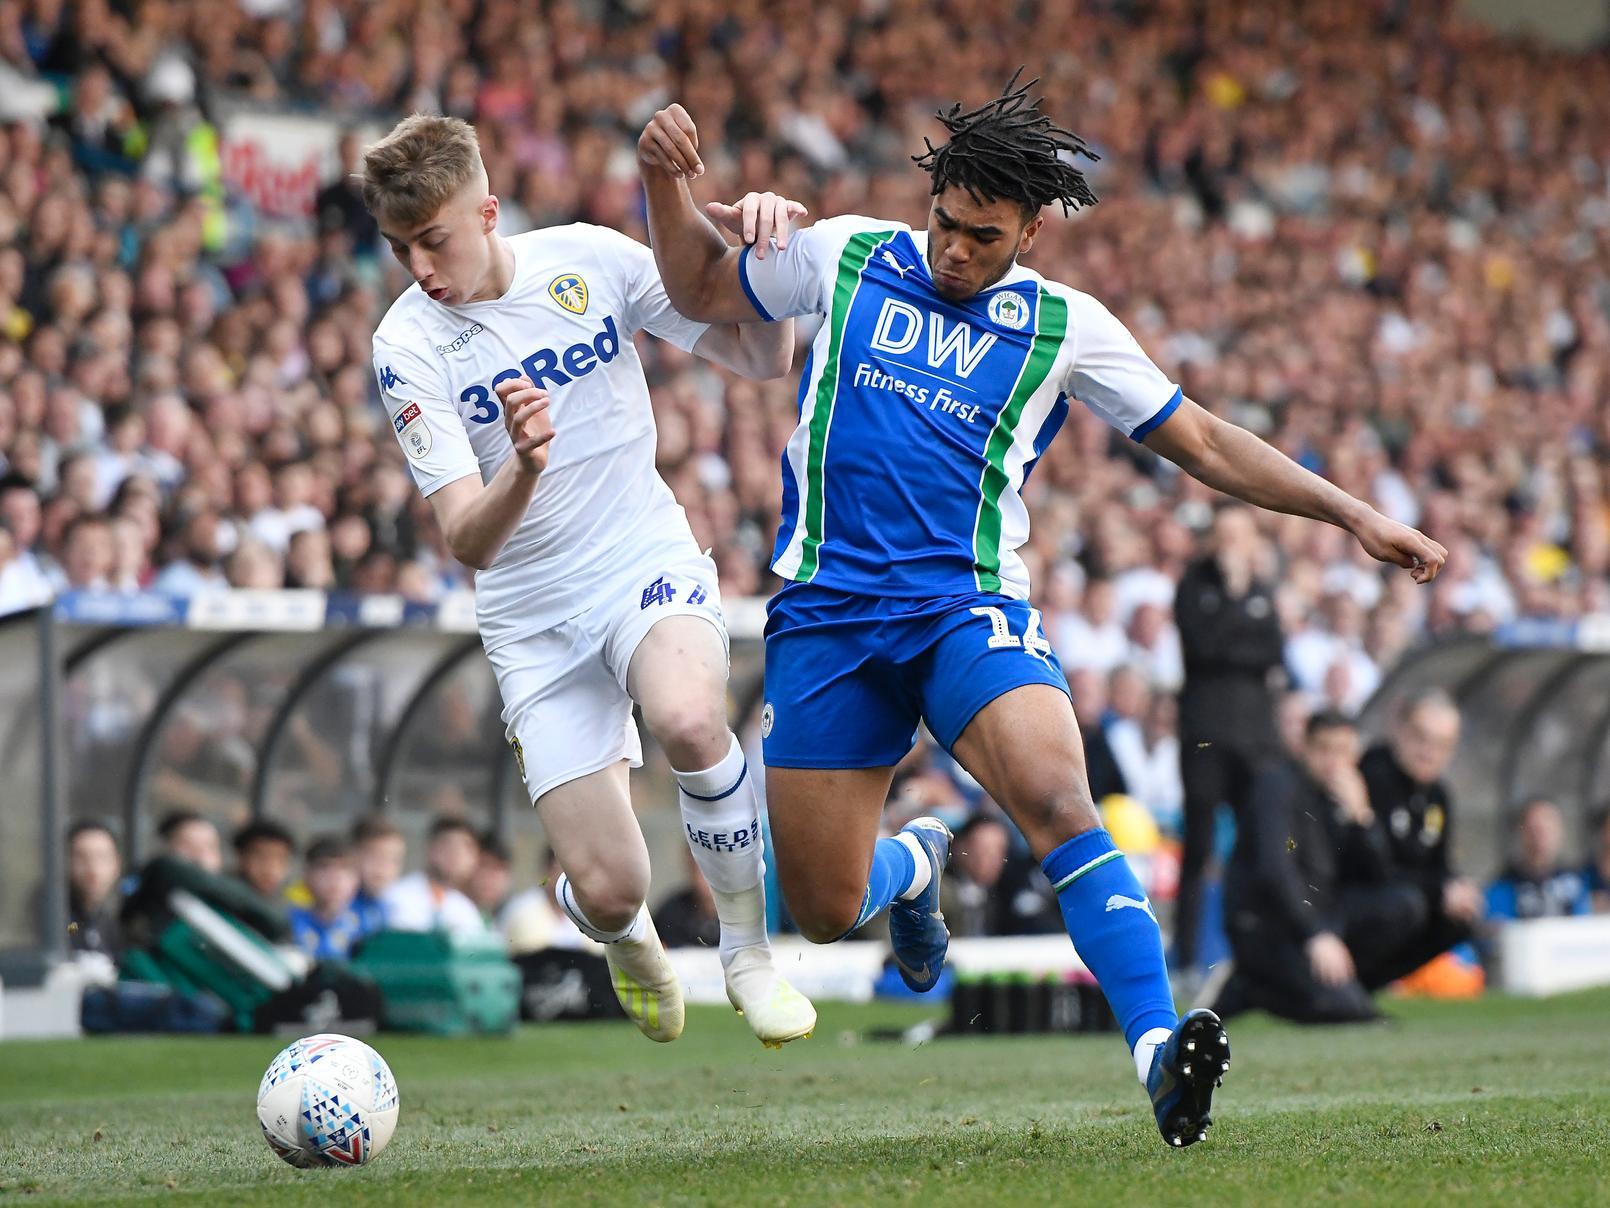 RIGHT-BACK: REECE JAMES-Joined Laticsin 2018 as a boy with no senior football experience, returned to Chelsea 12 months later a man with a glittering future ahead for club and country. Wasted right-back and ended up in midfield, top drawer set-piece and crossing delivery...as Paul Cook mused: 'He's man of the match every week'.